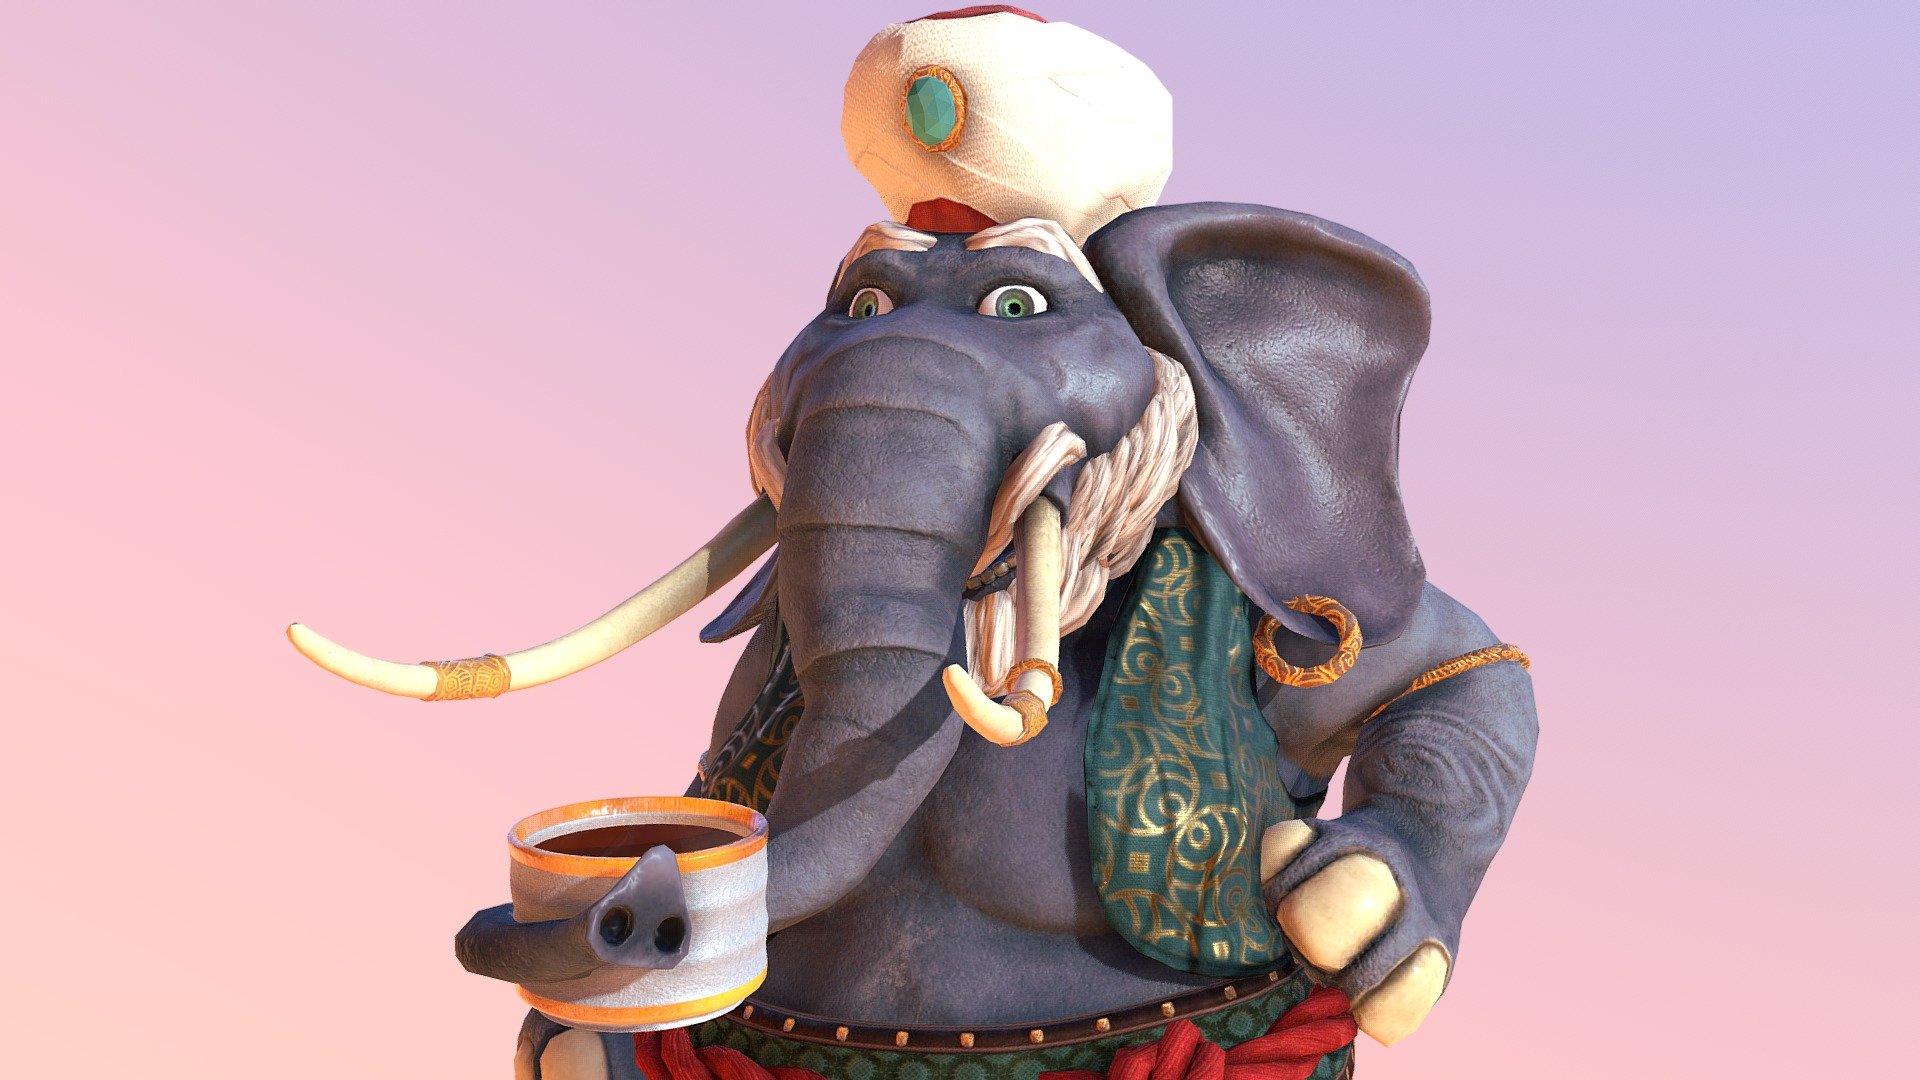 Another tea connosieur, a great and wise indian Chaivar.

Made with Blender and Substance Painter 3d model